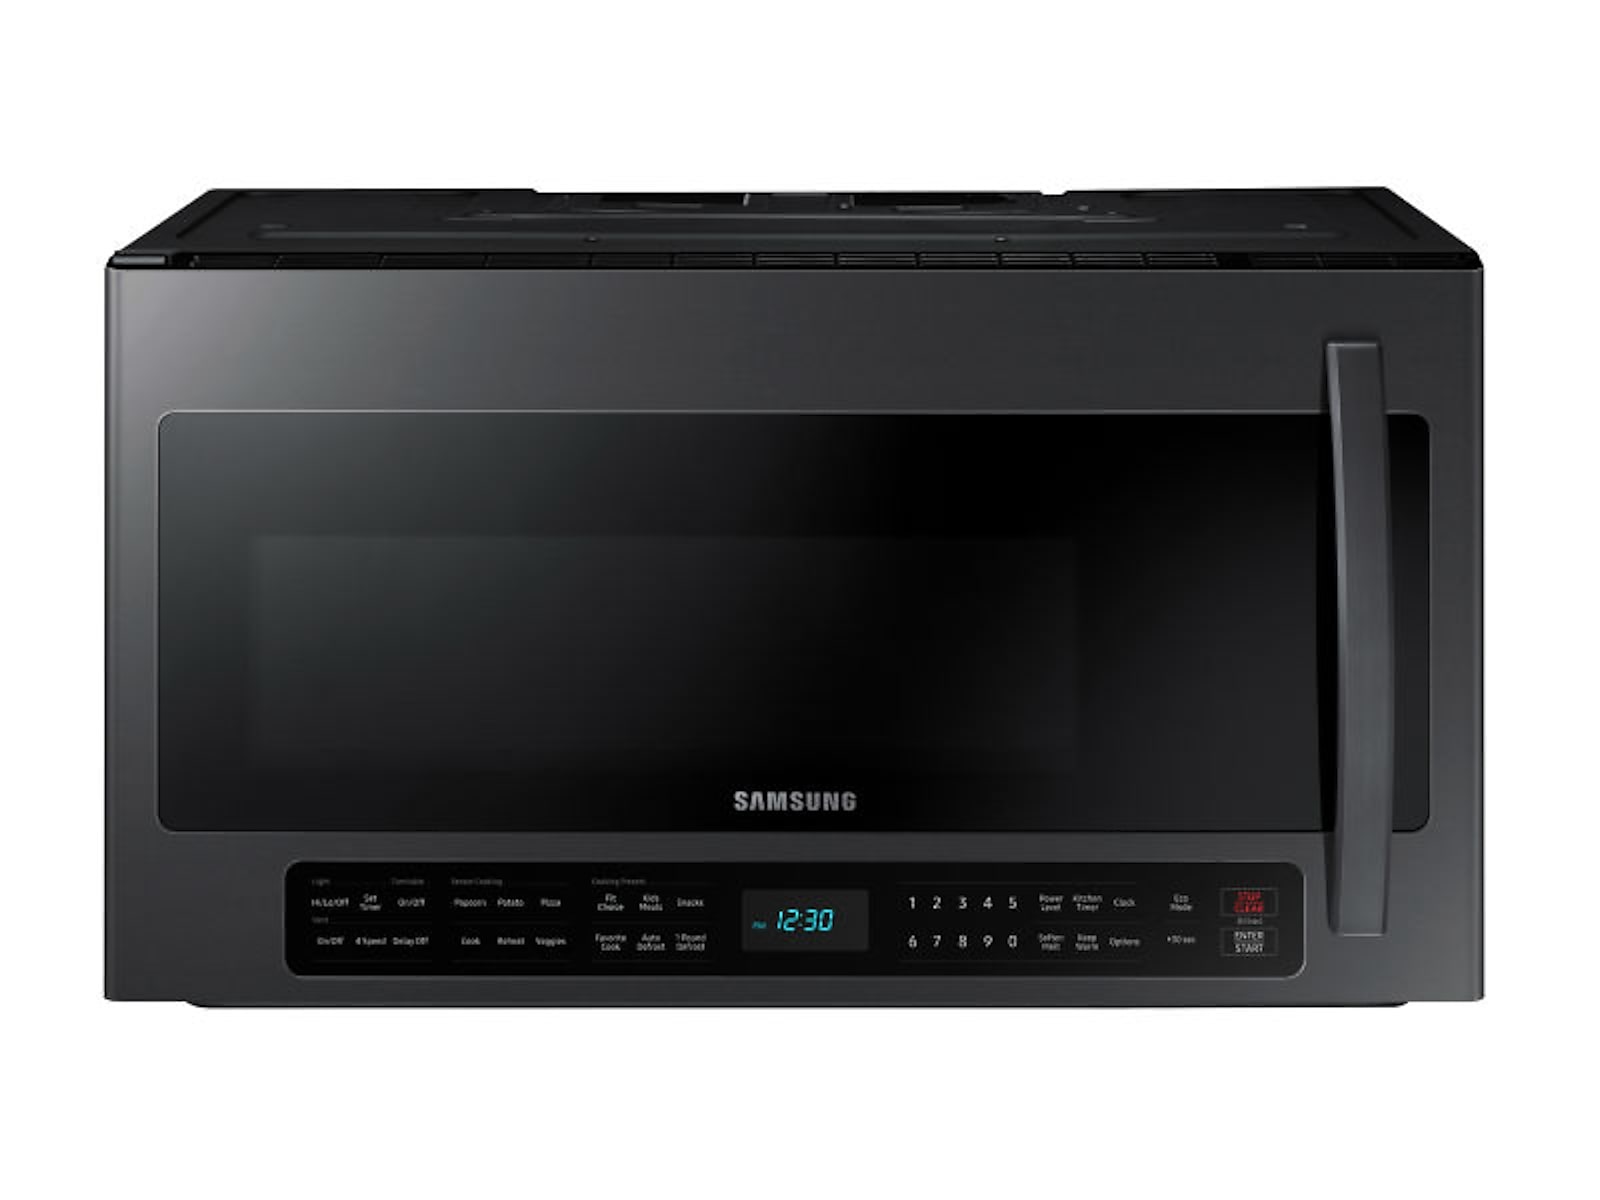 Samsung 2.1 cu. ft. Over-the-Range Microwave with Sensor Cooking in Fingerprint Resistant in Black Stainless Steel(ME21R7051SG/AA) photo